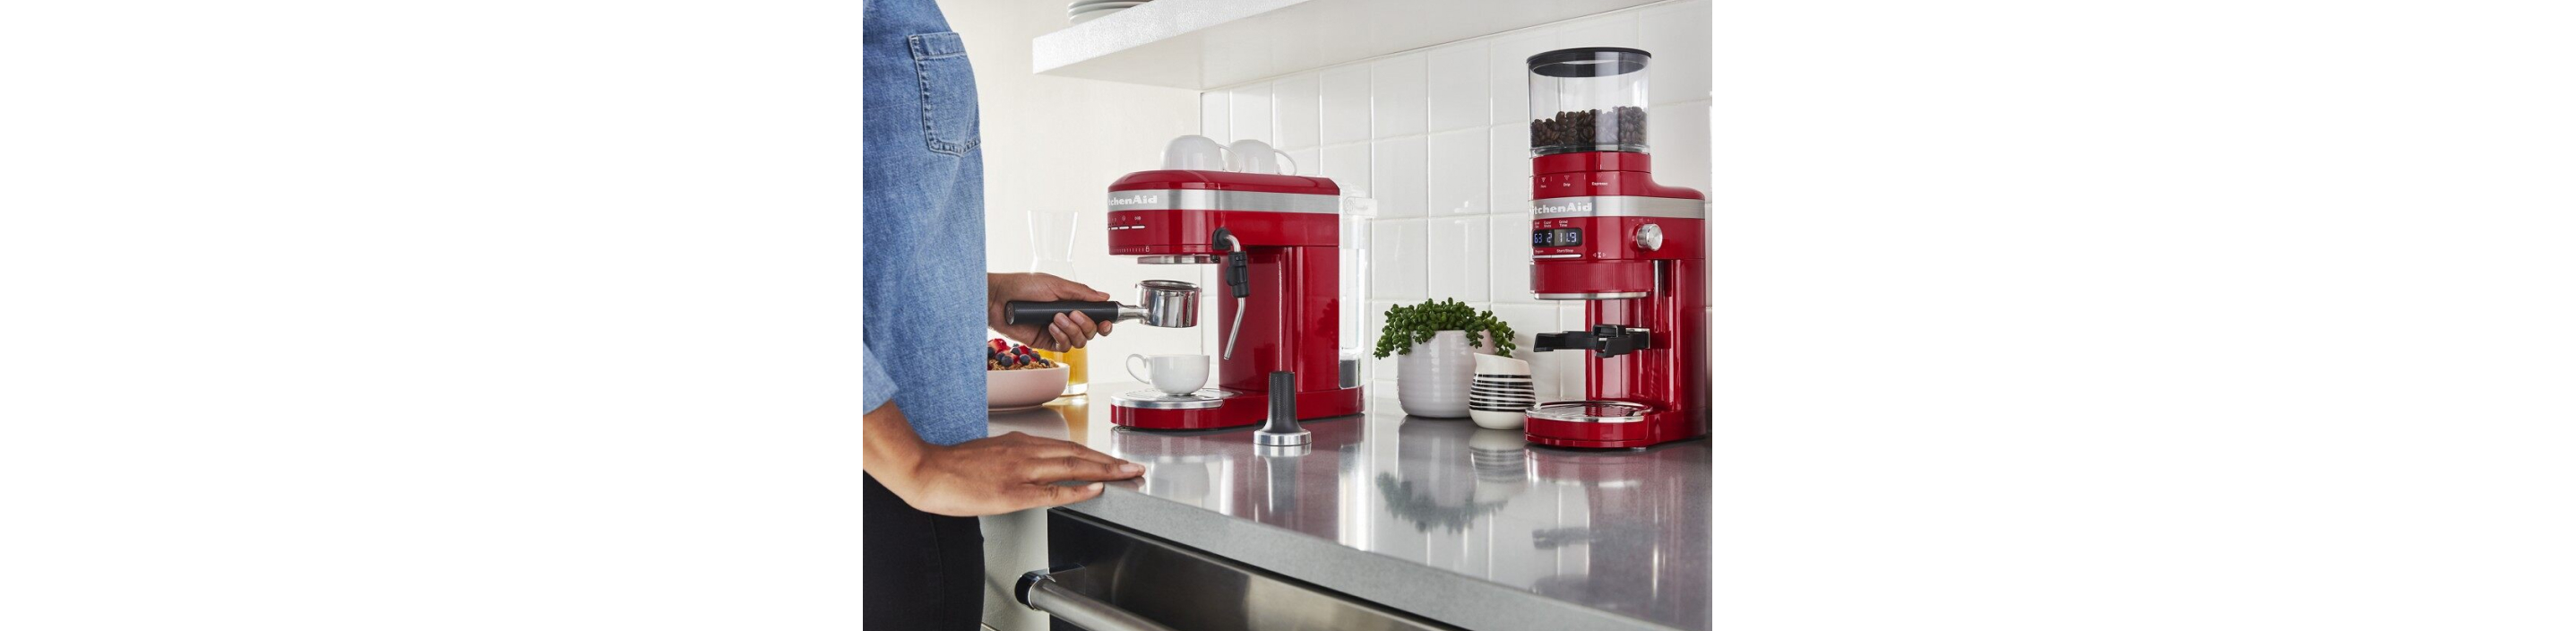 Woman using a red espresso coffee maker and grinder on countertop